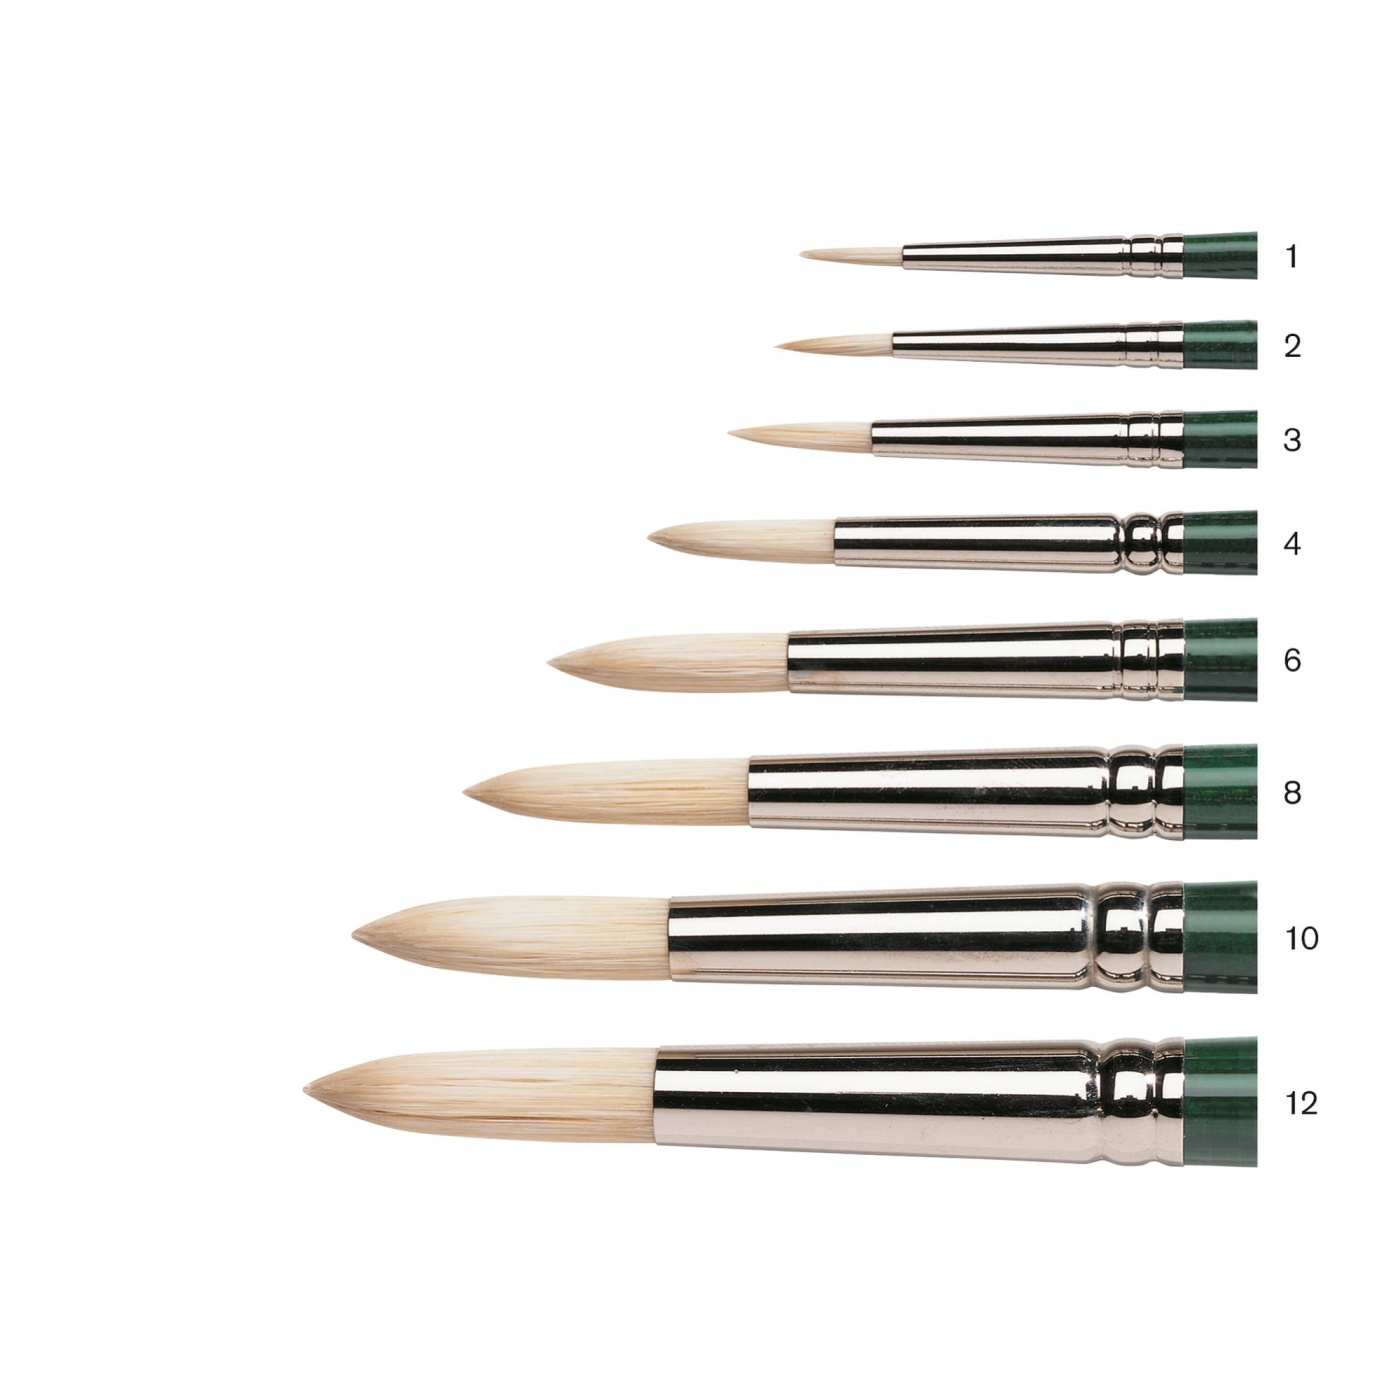 Winton Hog Brush Round 1 in the group Art Supplies / Brushes / Natural Hair Brushes at Pen Store (107574)